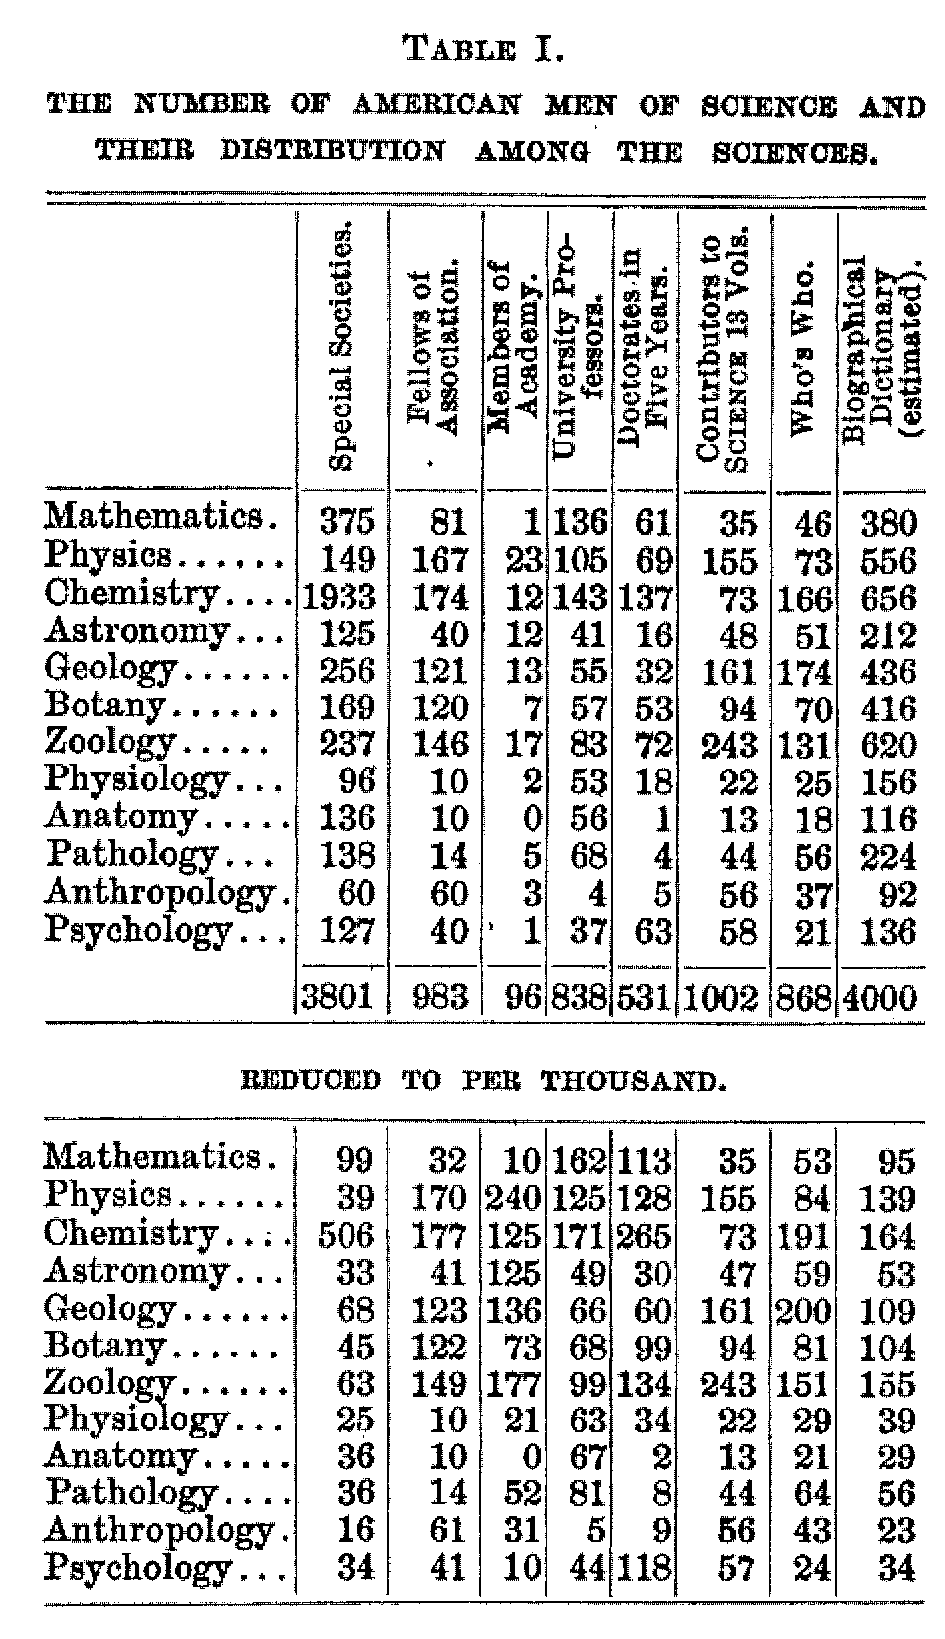 Table 1 The number of American Men of Science and their Distribution among the Sciences